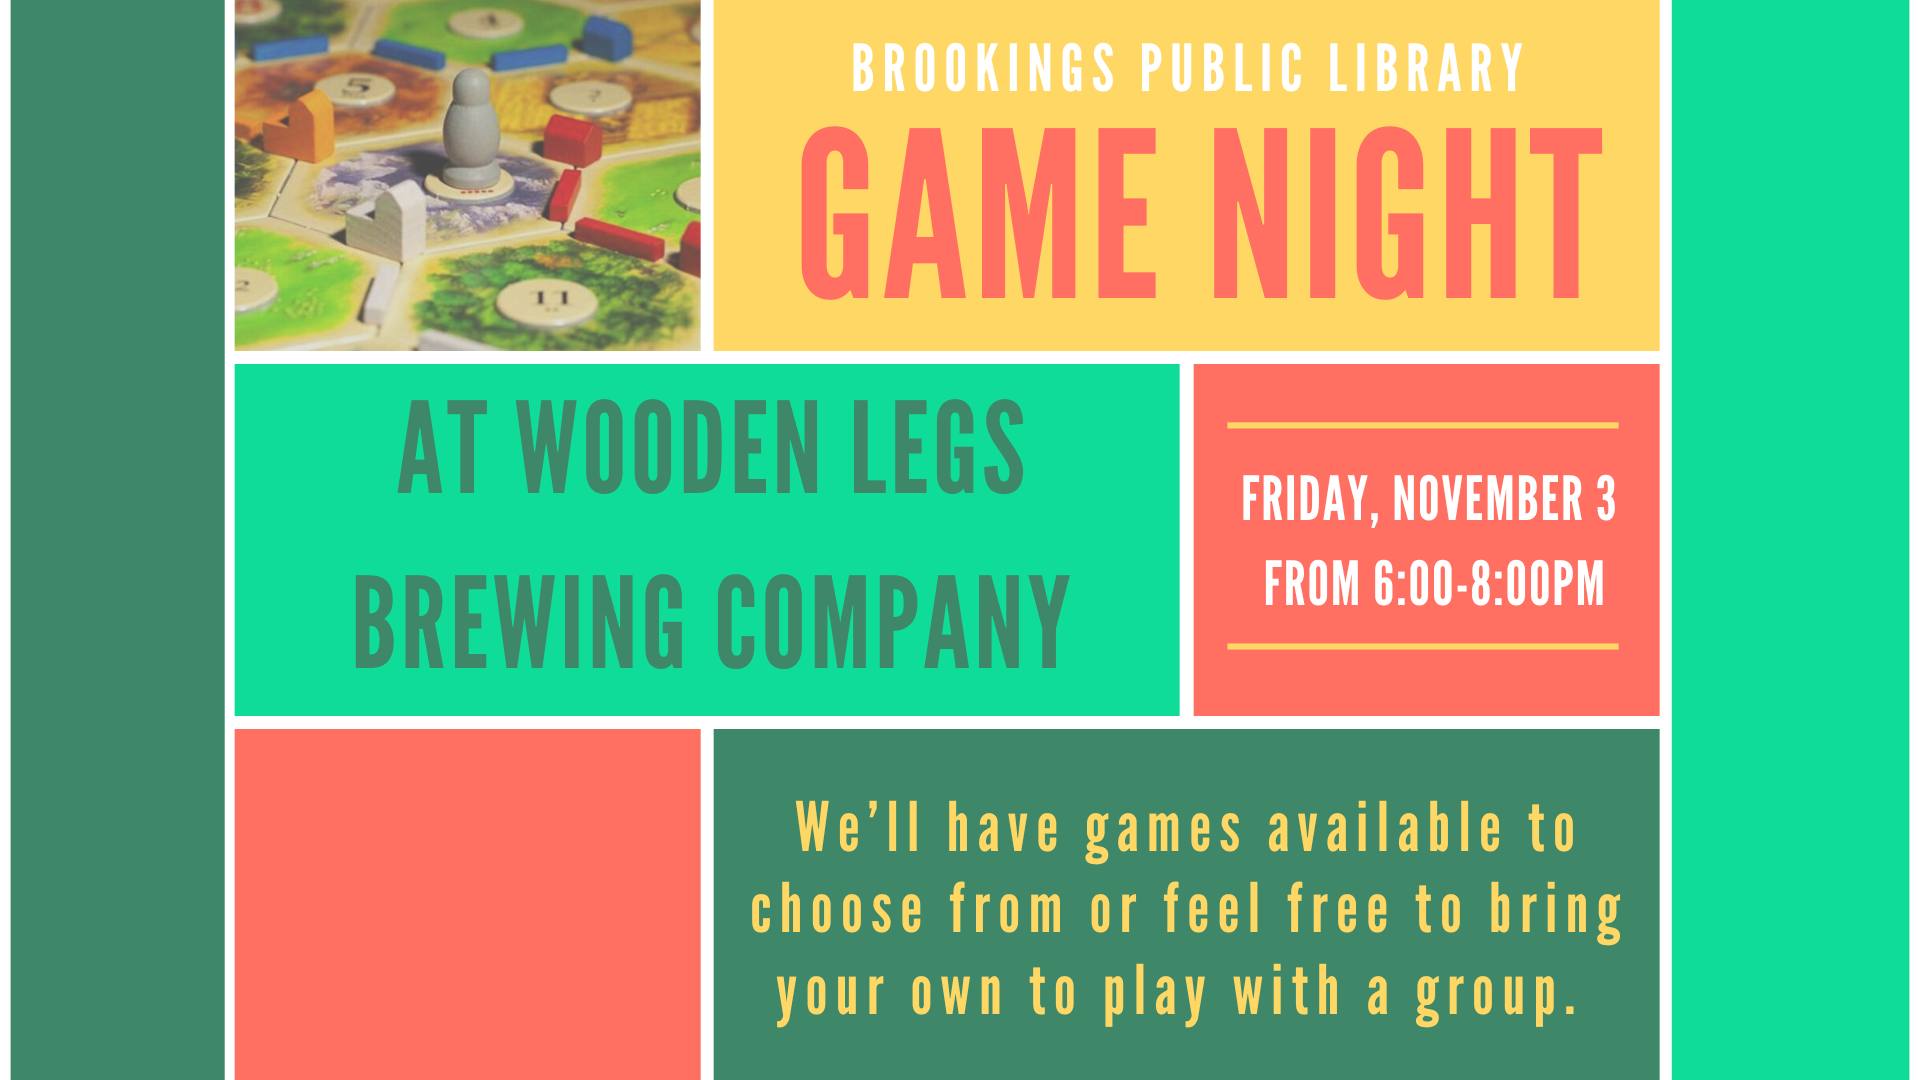 BPL Game Night at Wooden Legs